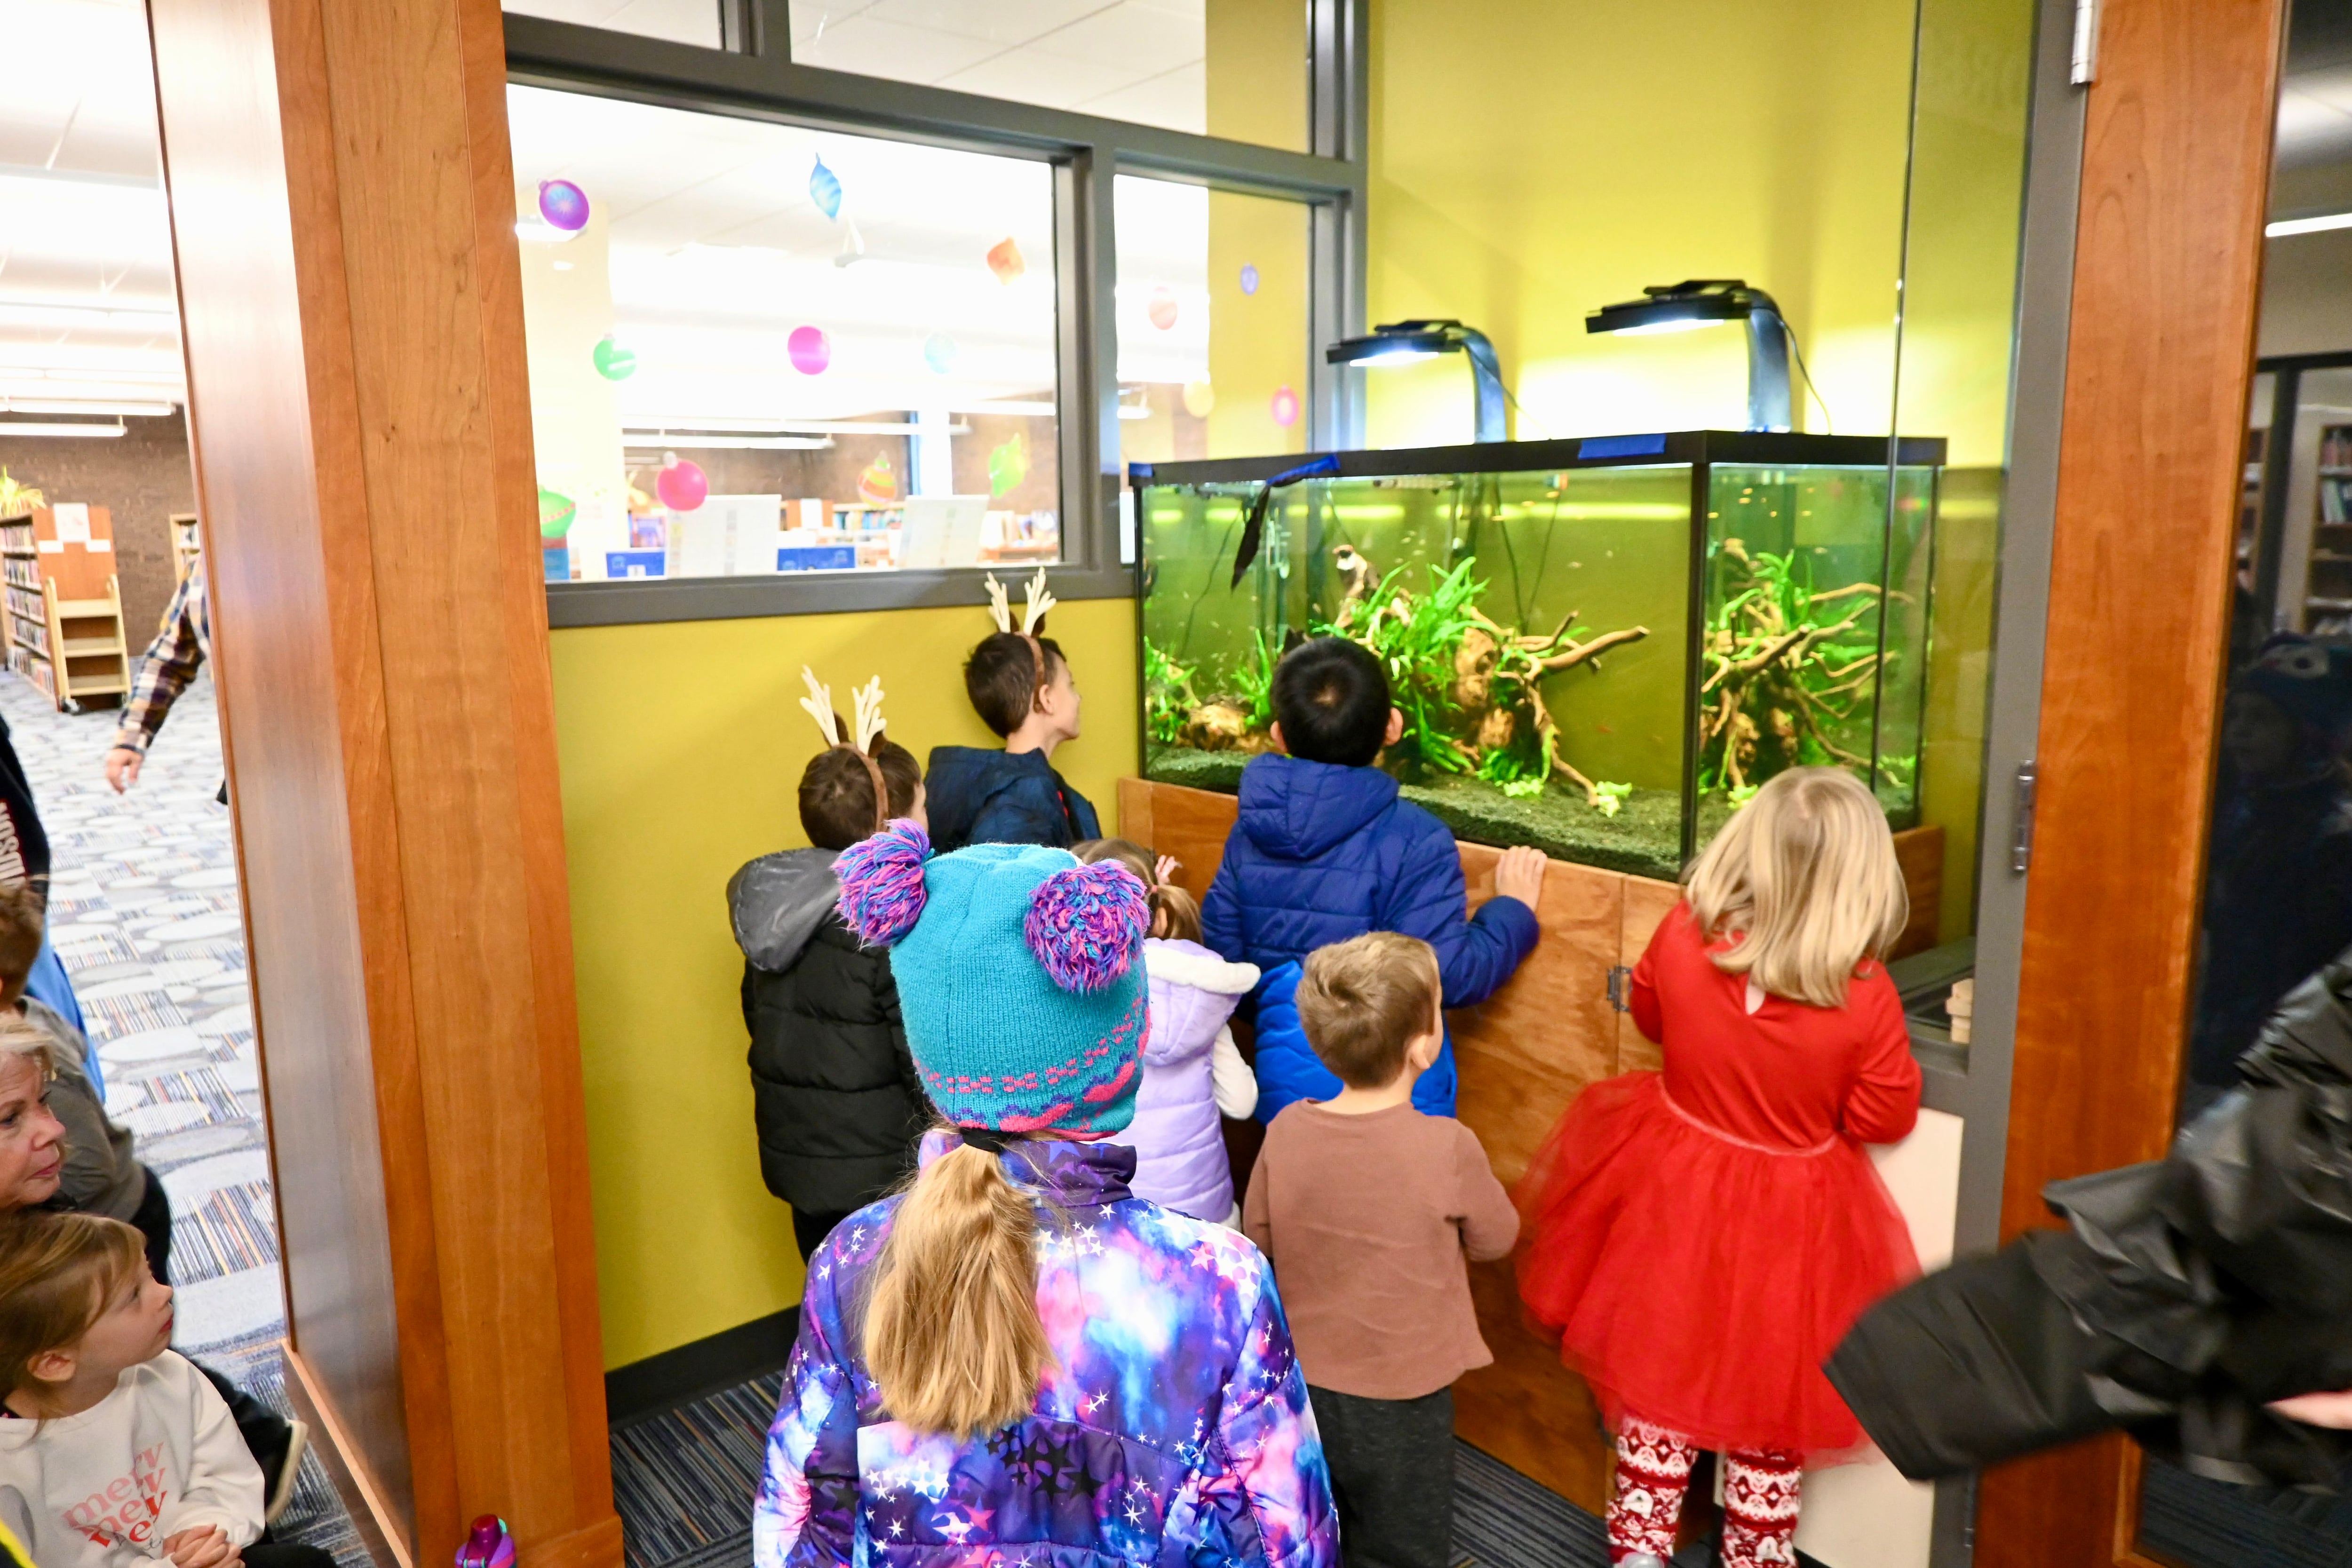 Children gather around the tank to gaze at fish during the unveiling of the new aquarium on Saturday Dec. 16 at Reddick Library in Ottawa.